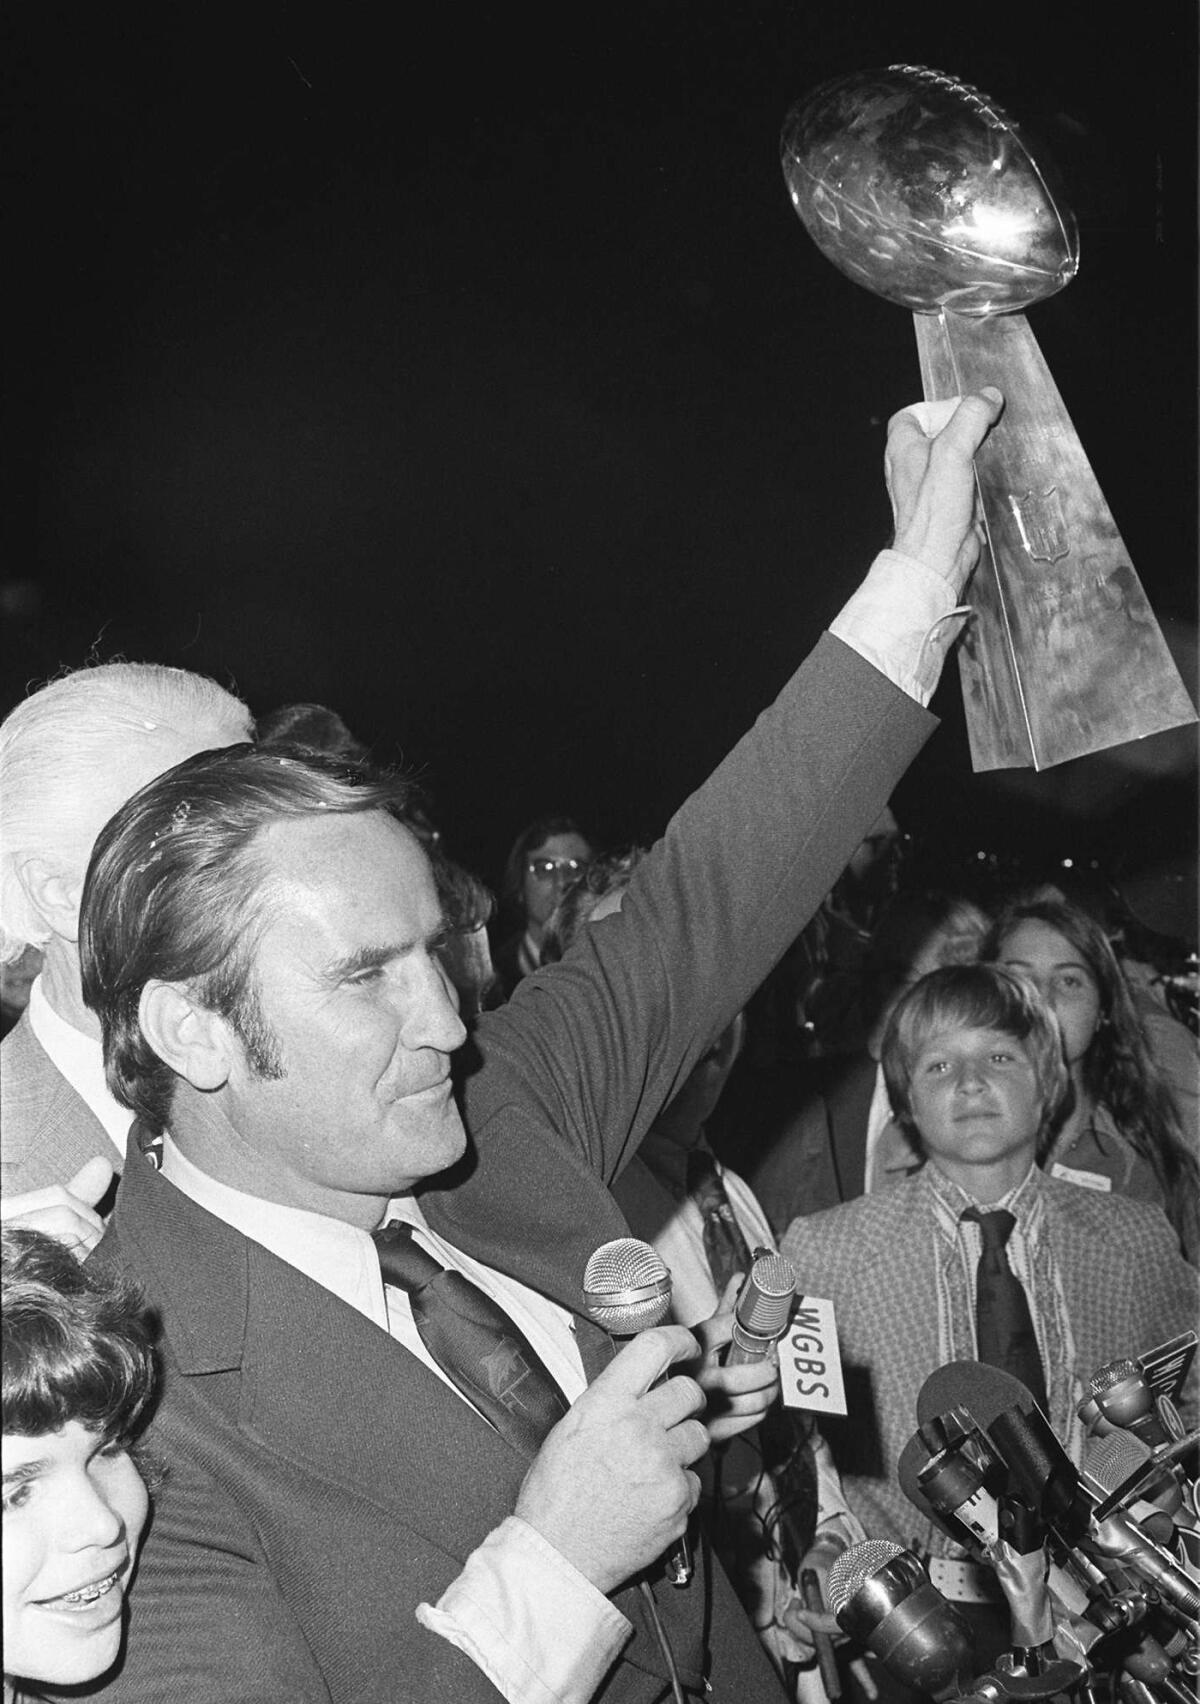 Miami coach Don Shula waves the Lombardi trophy for fans after arriving in Miami following Super Bowl VII.